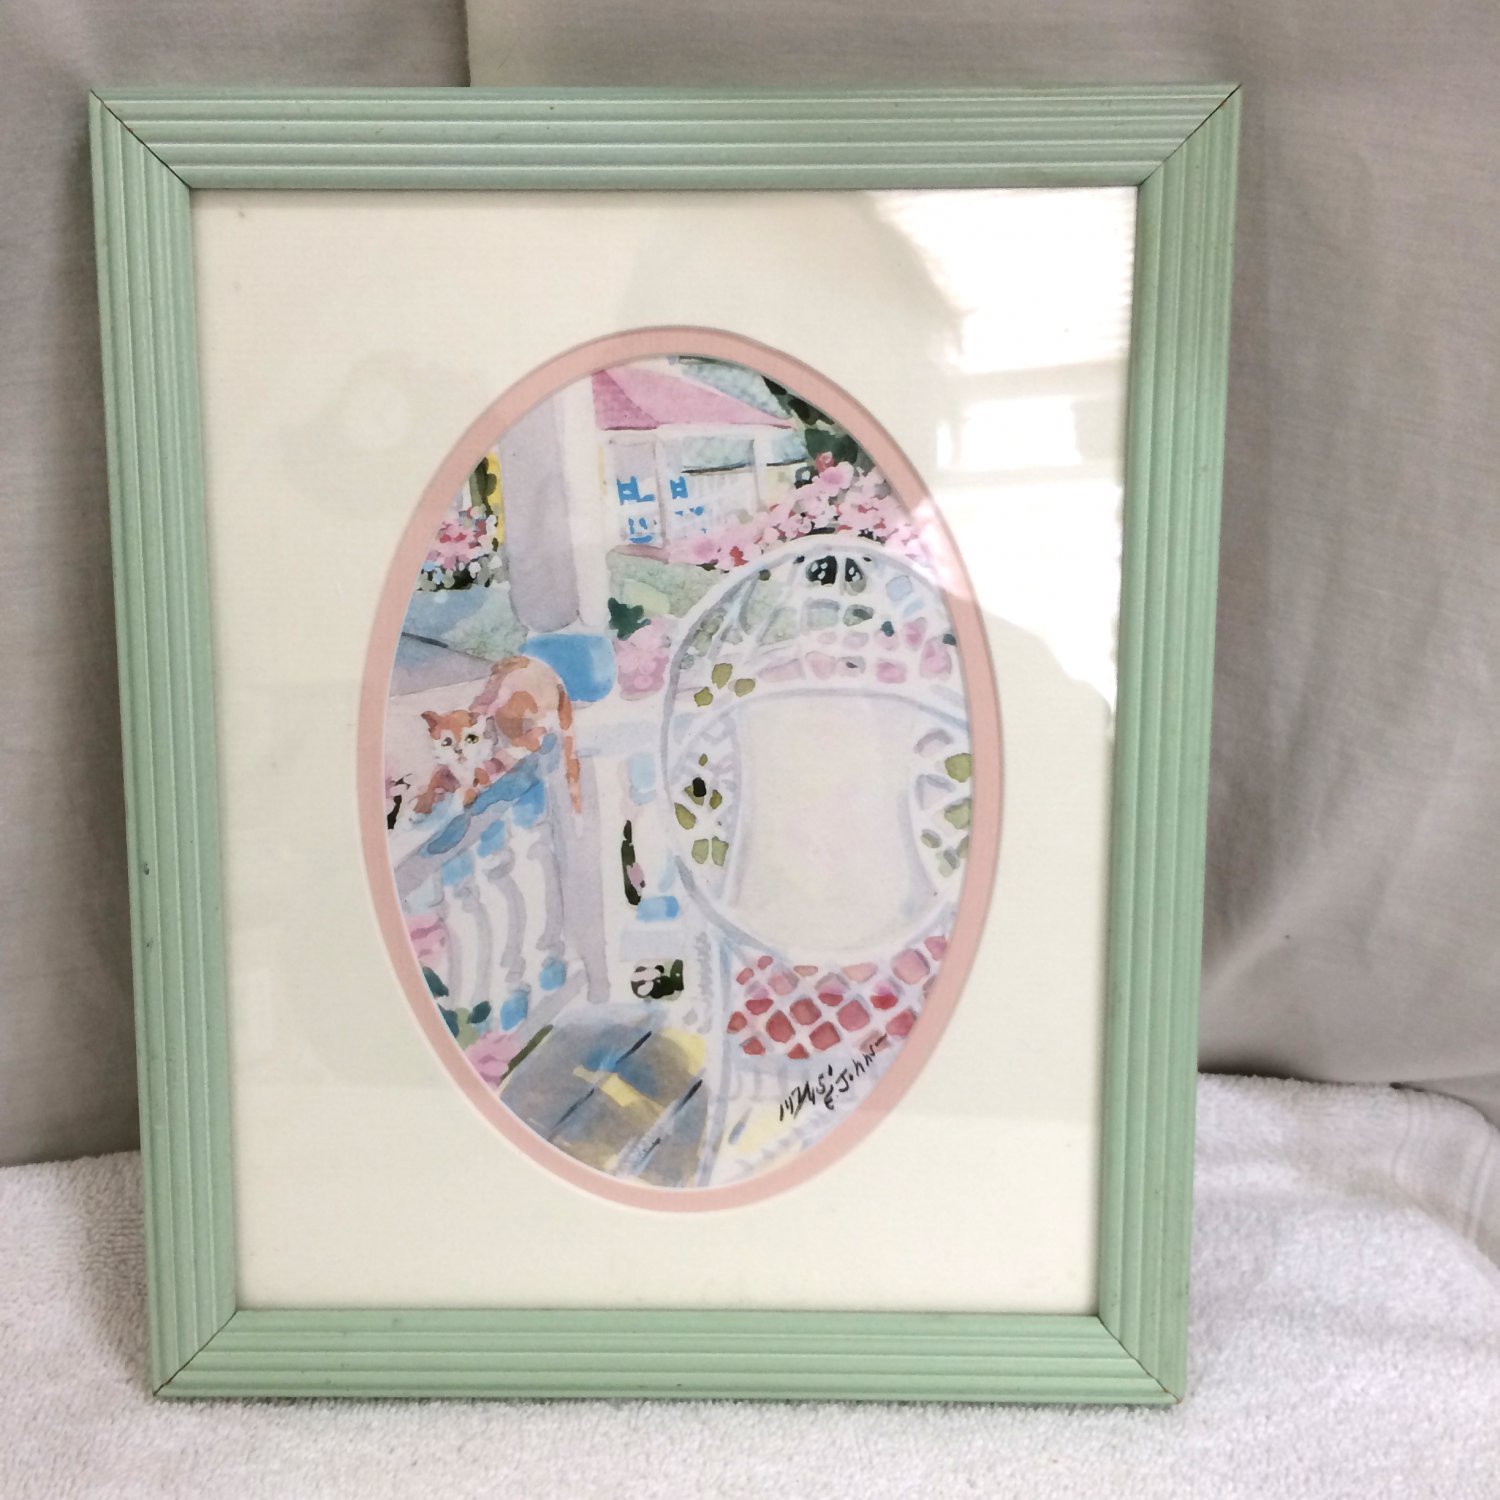 Signed Numbered Print Emily Johnson Watercolor Cat Porch Wicker Chair Matted Framed